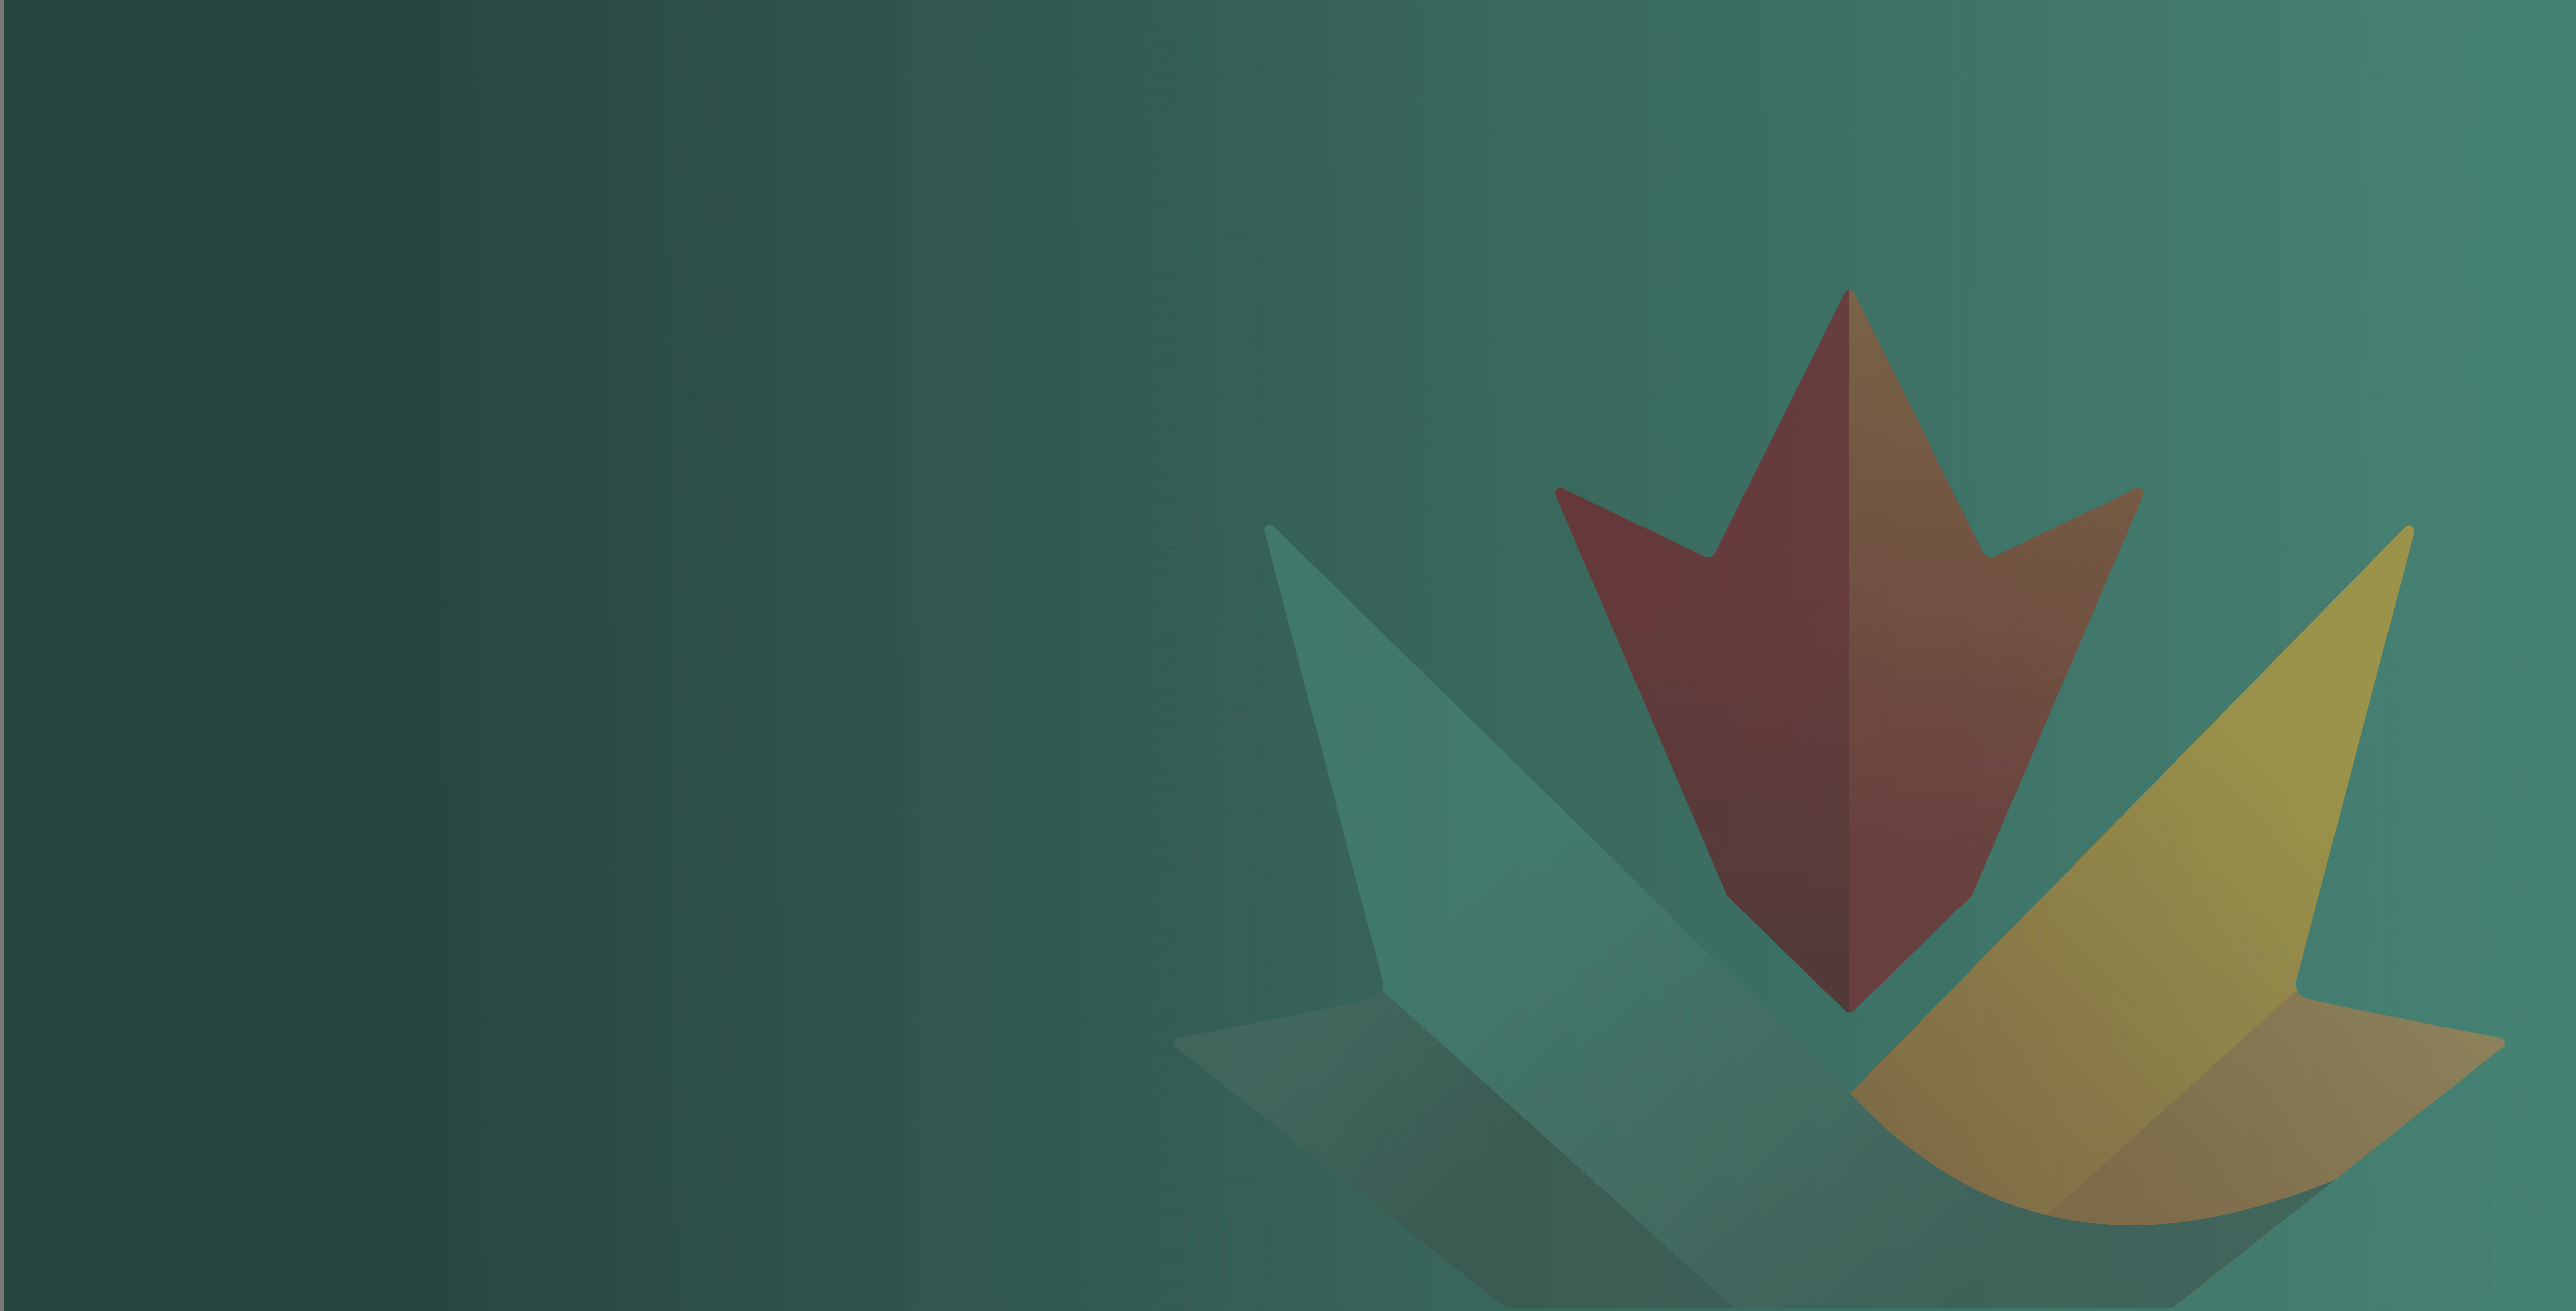 A maple leaf shape on top of a green background